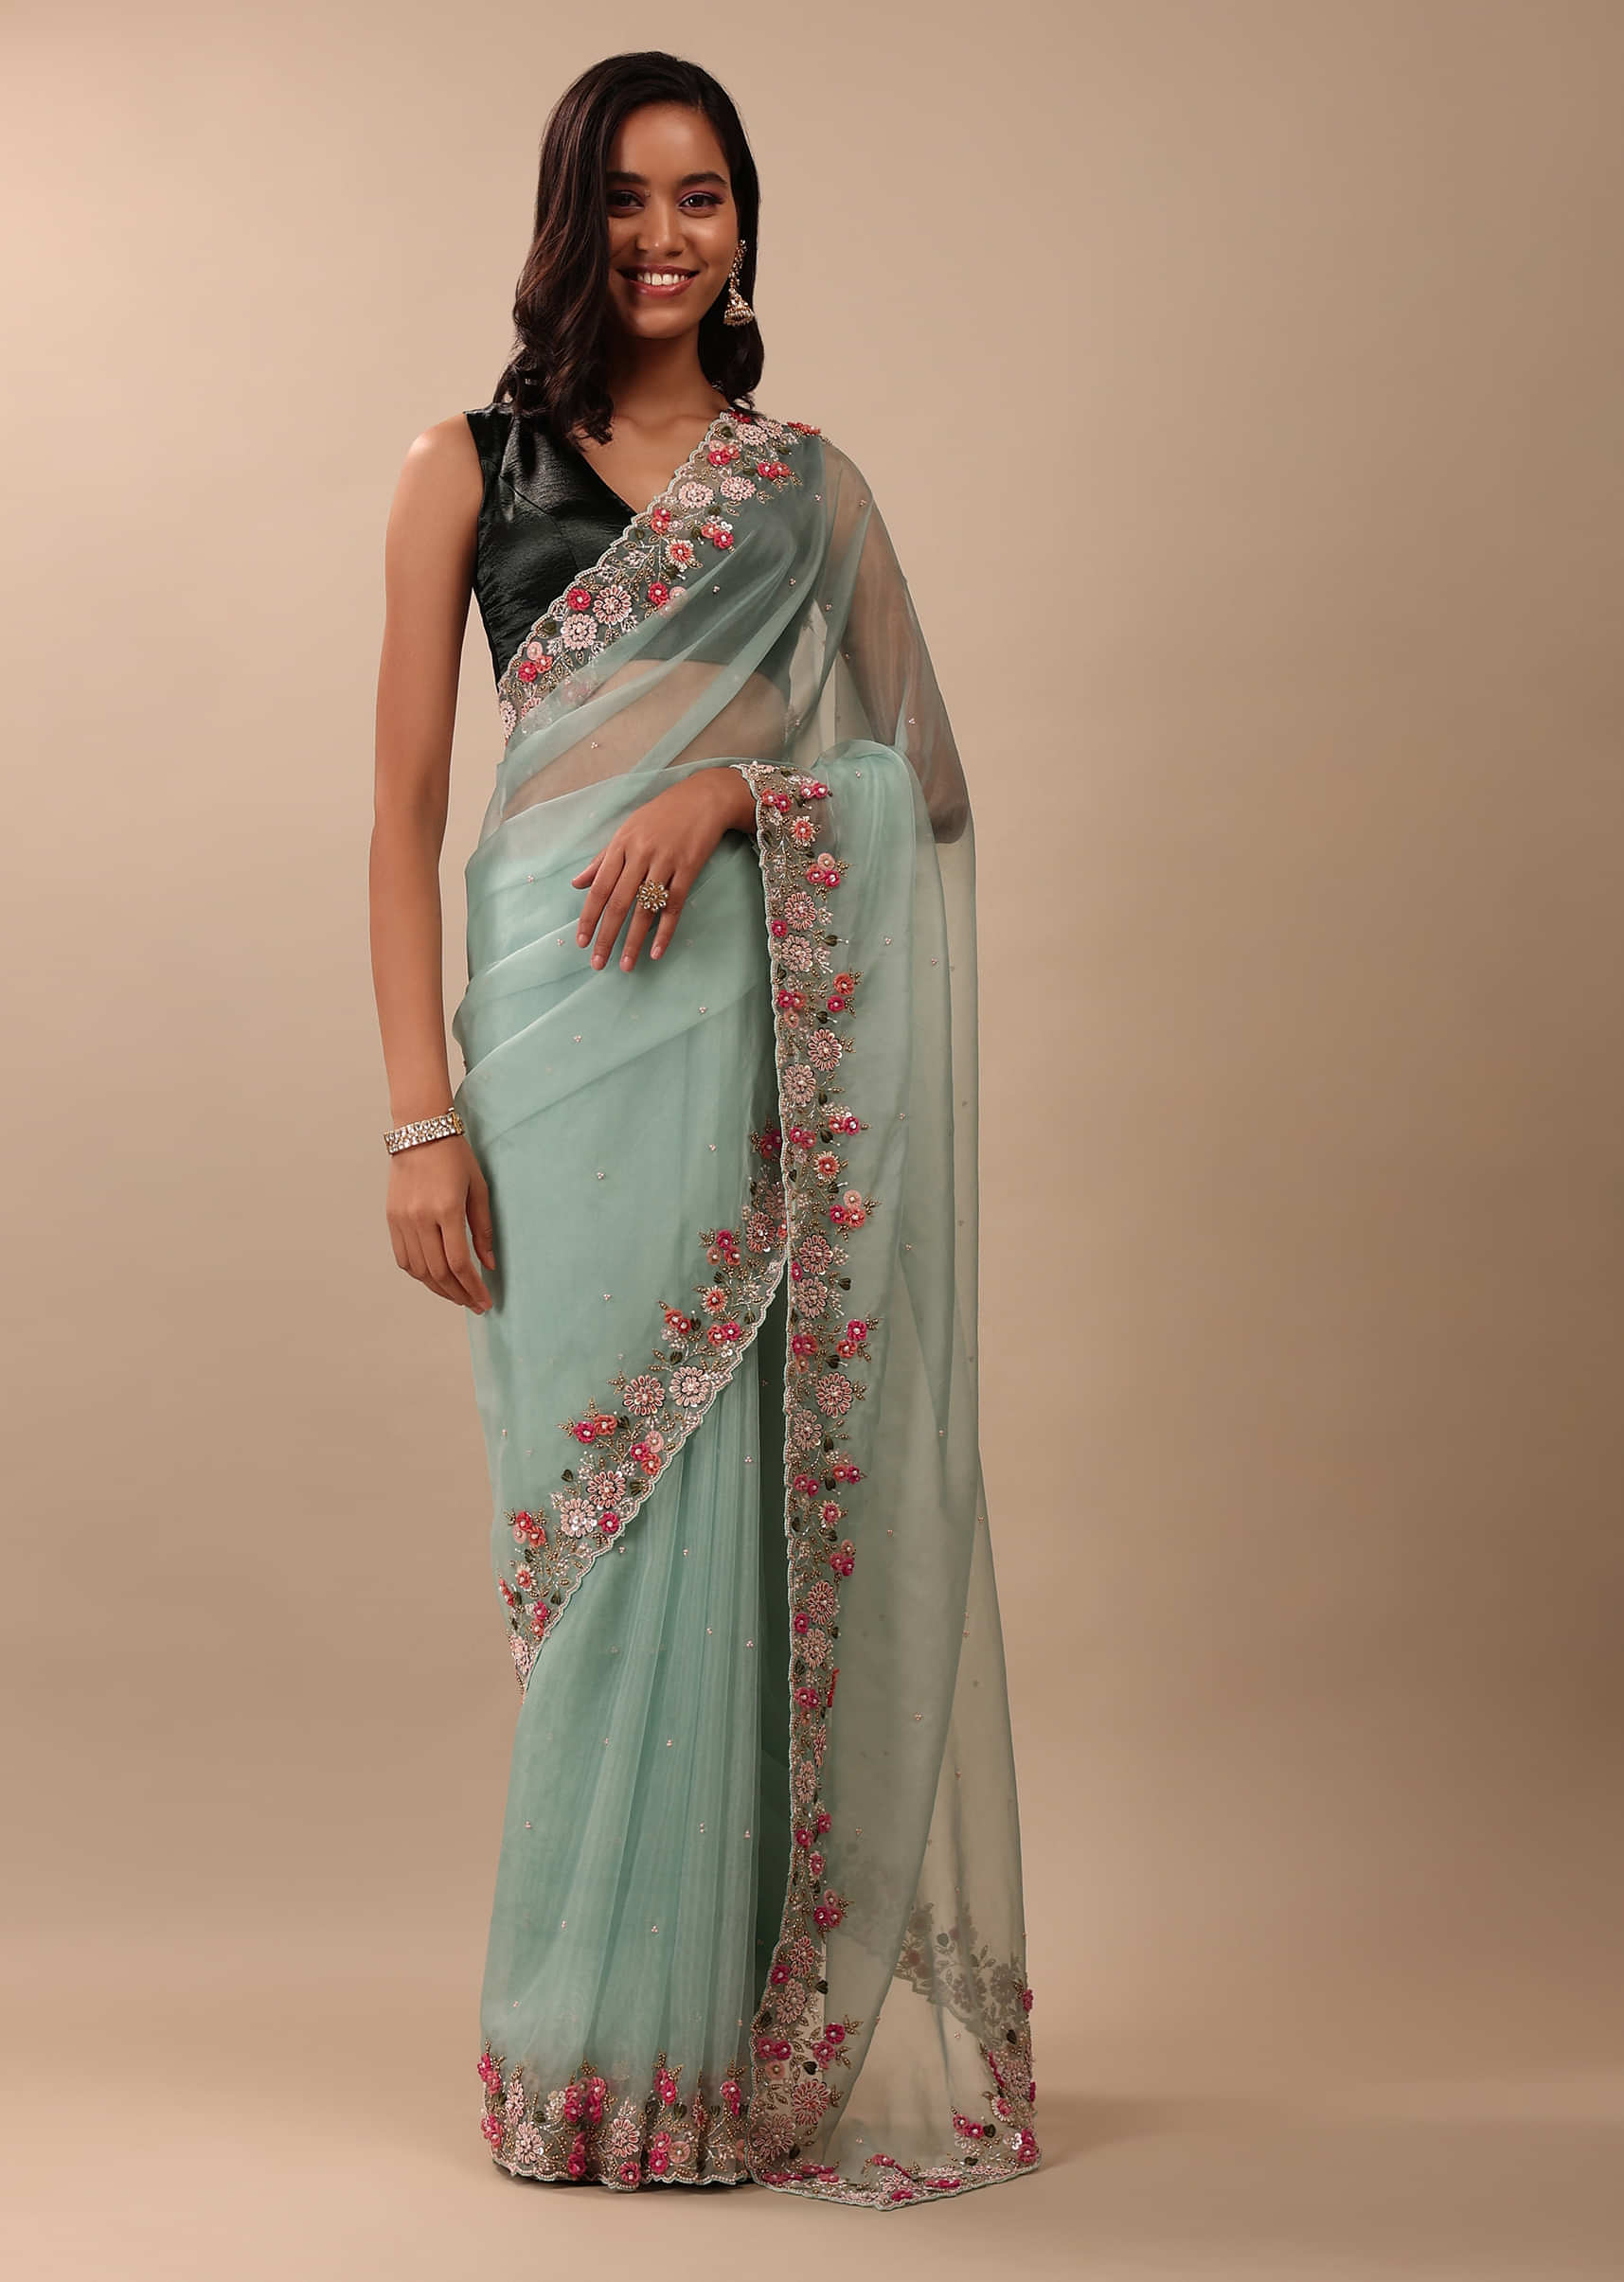 Aqua Blue Saree In Organza With 3D Floral Embroidery In Thread, Zardosi & French Knots